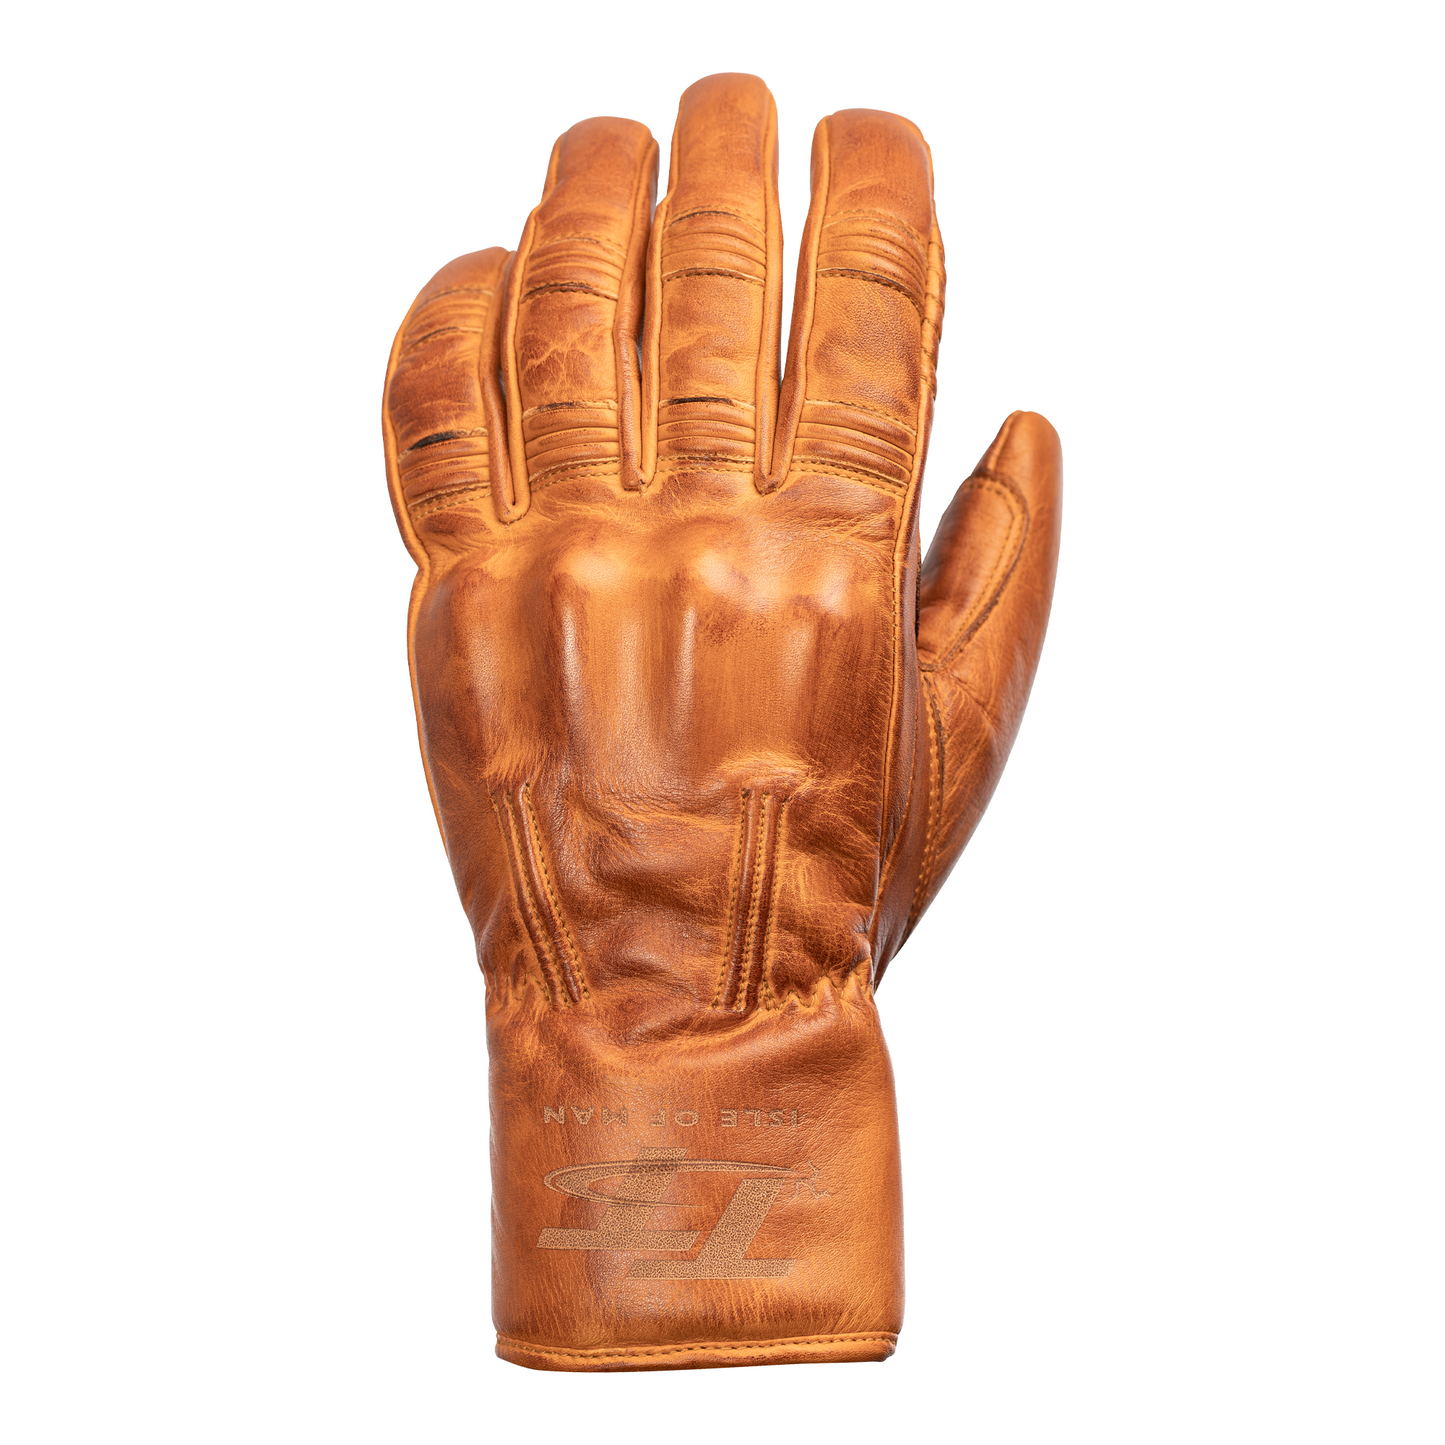 RST IOM TT Hillberry Classic Leather Riding Gloves - CE APPROVED - Tan